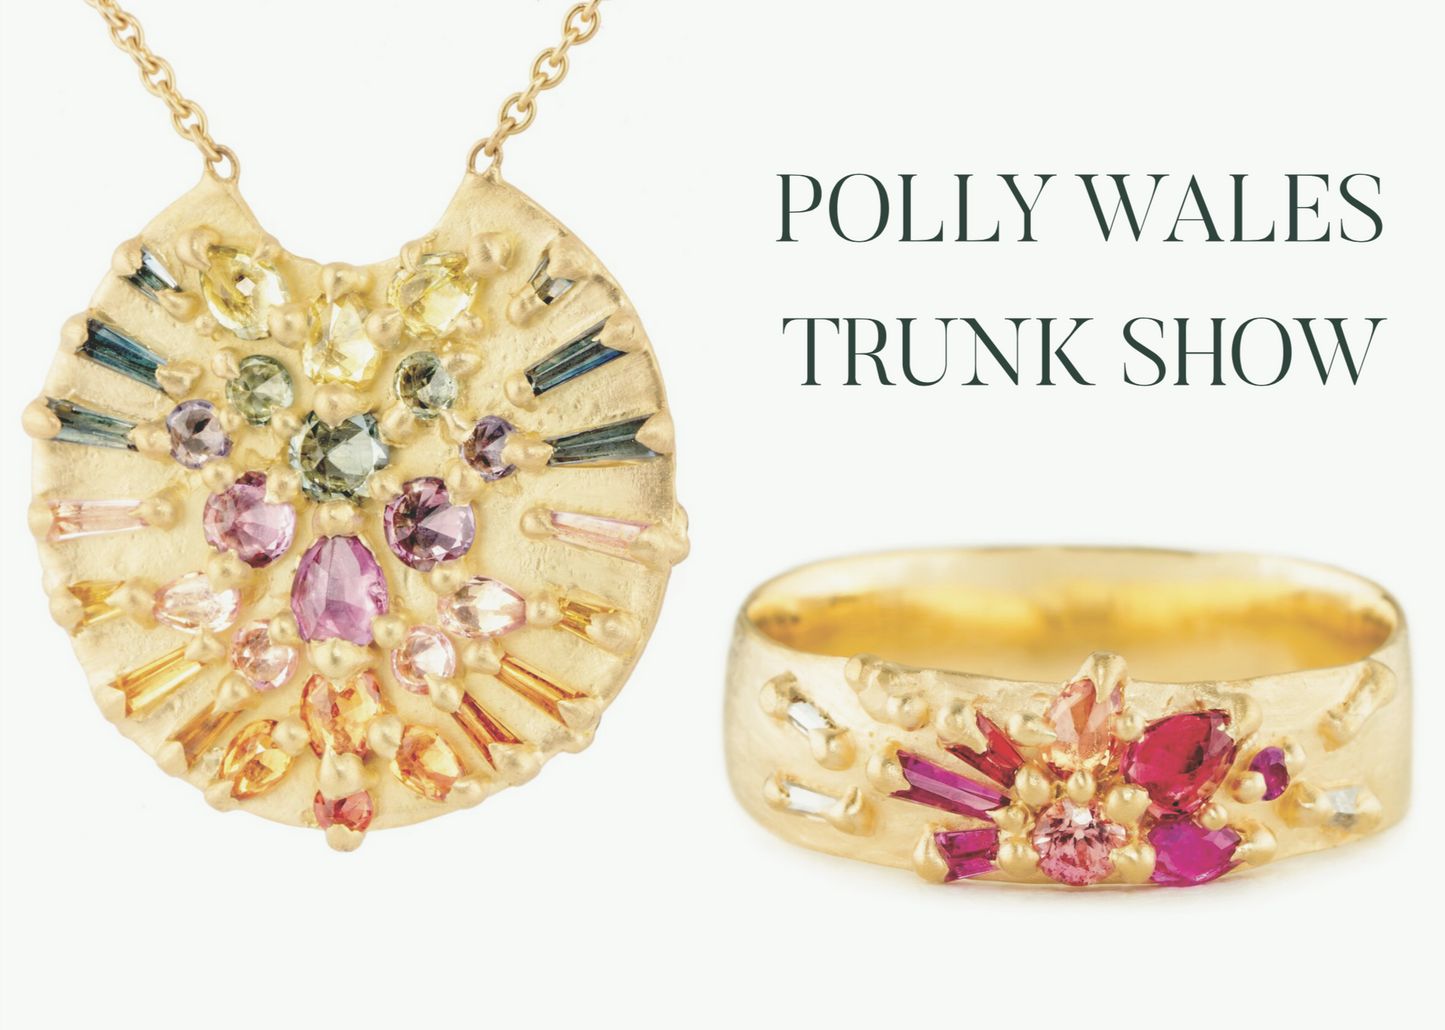 Polly Wales Trunk Show in Ardmore